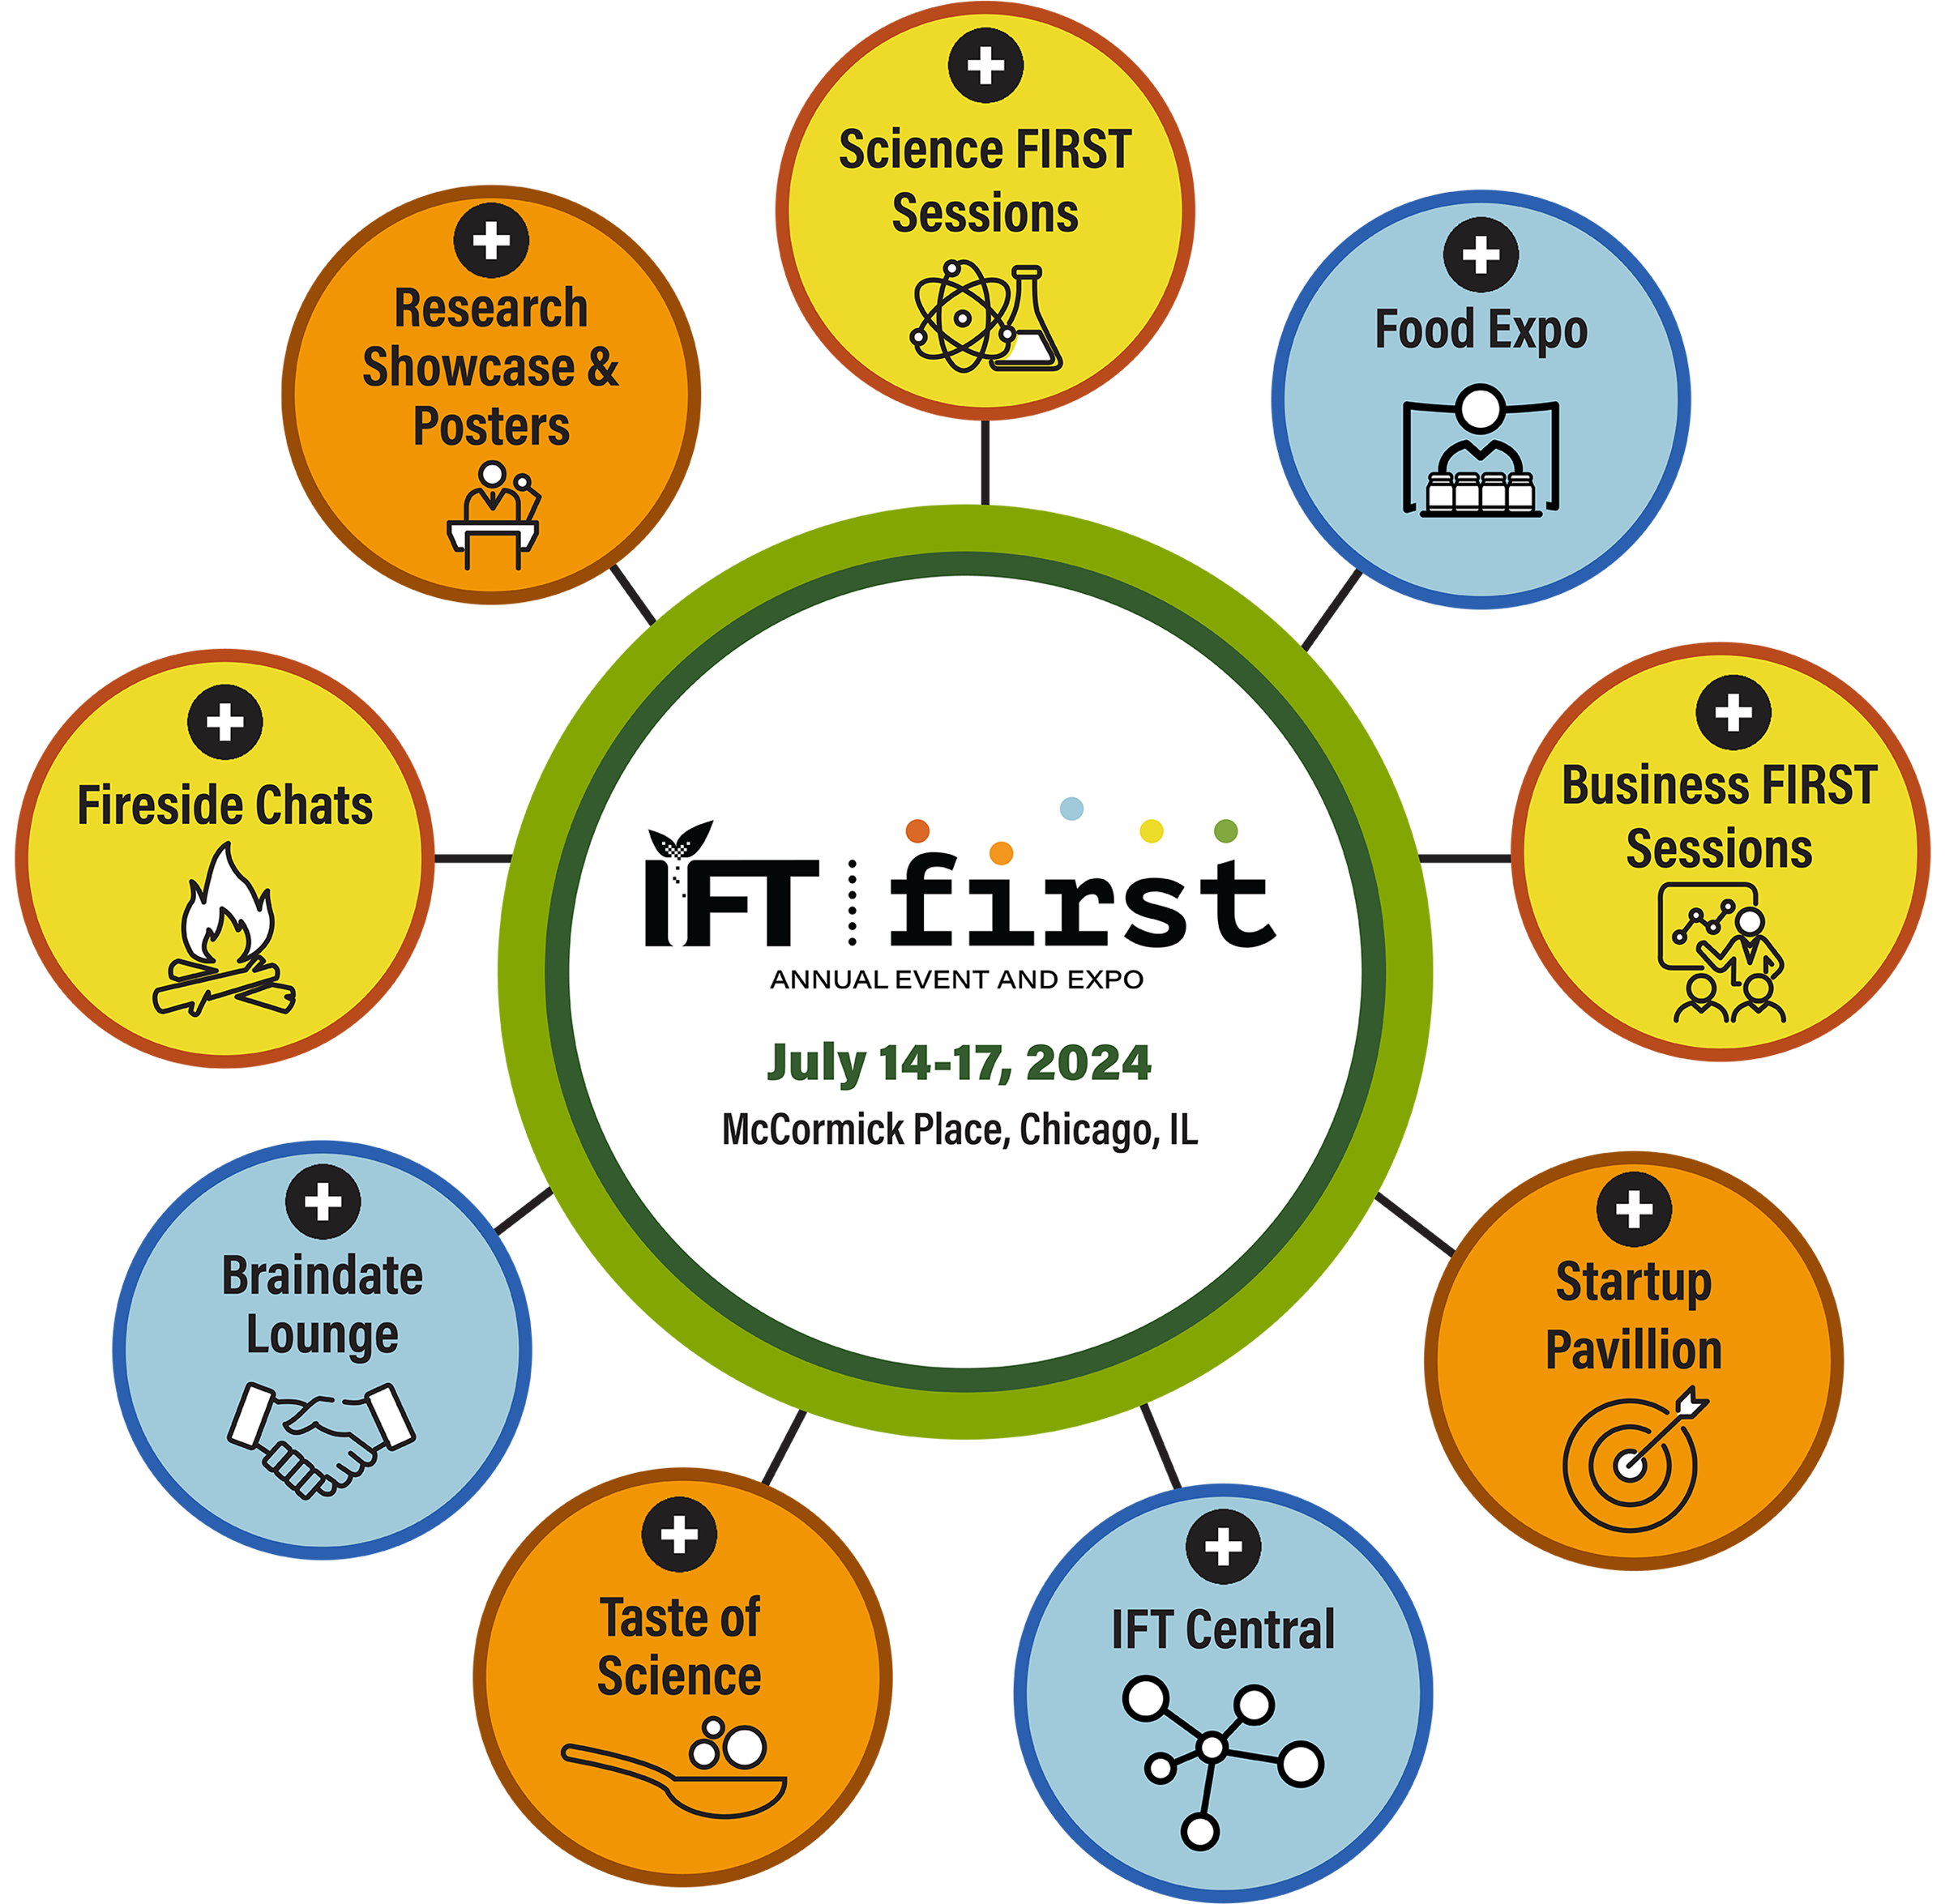 About IFT FIRST